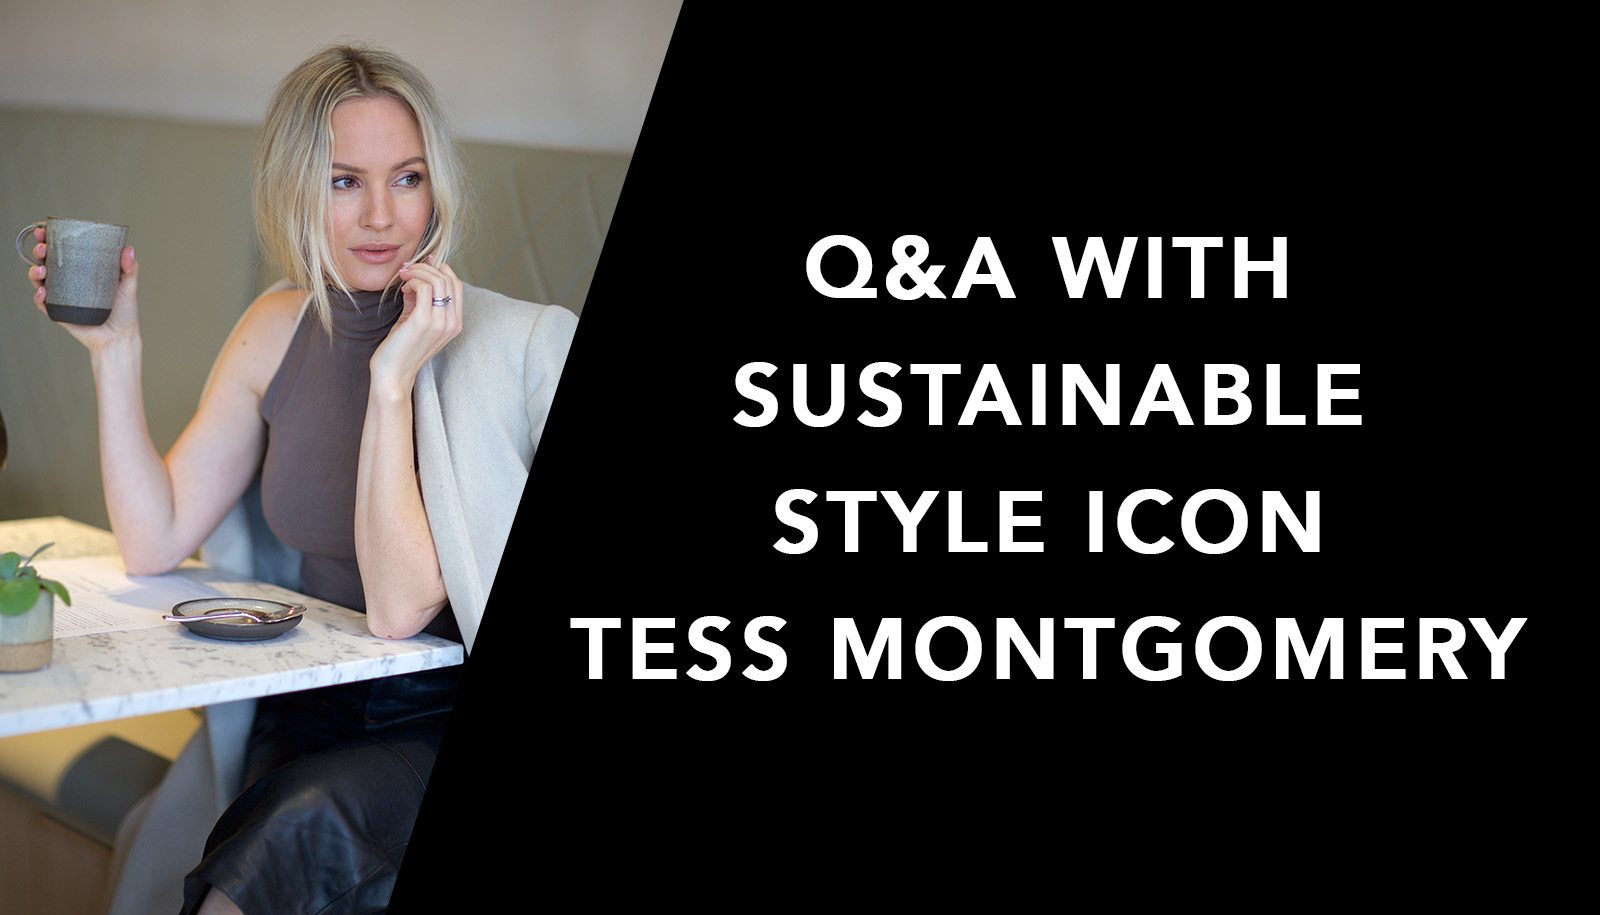 Sustainable Style Icon: Q&A with Tess Montgomery